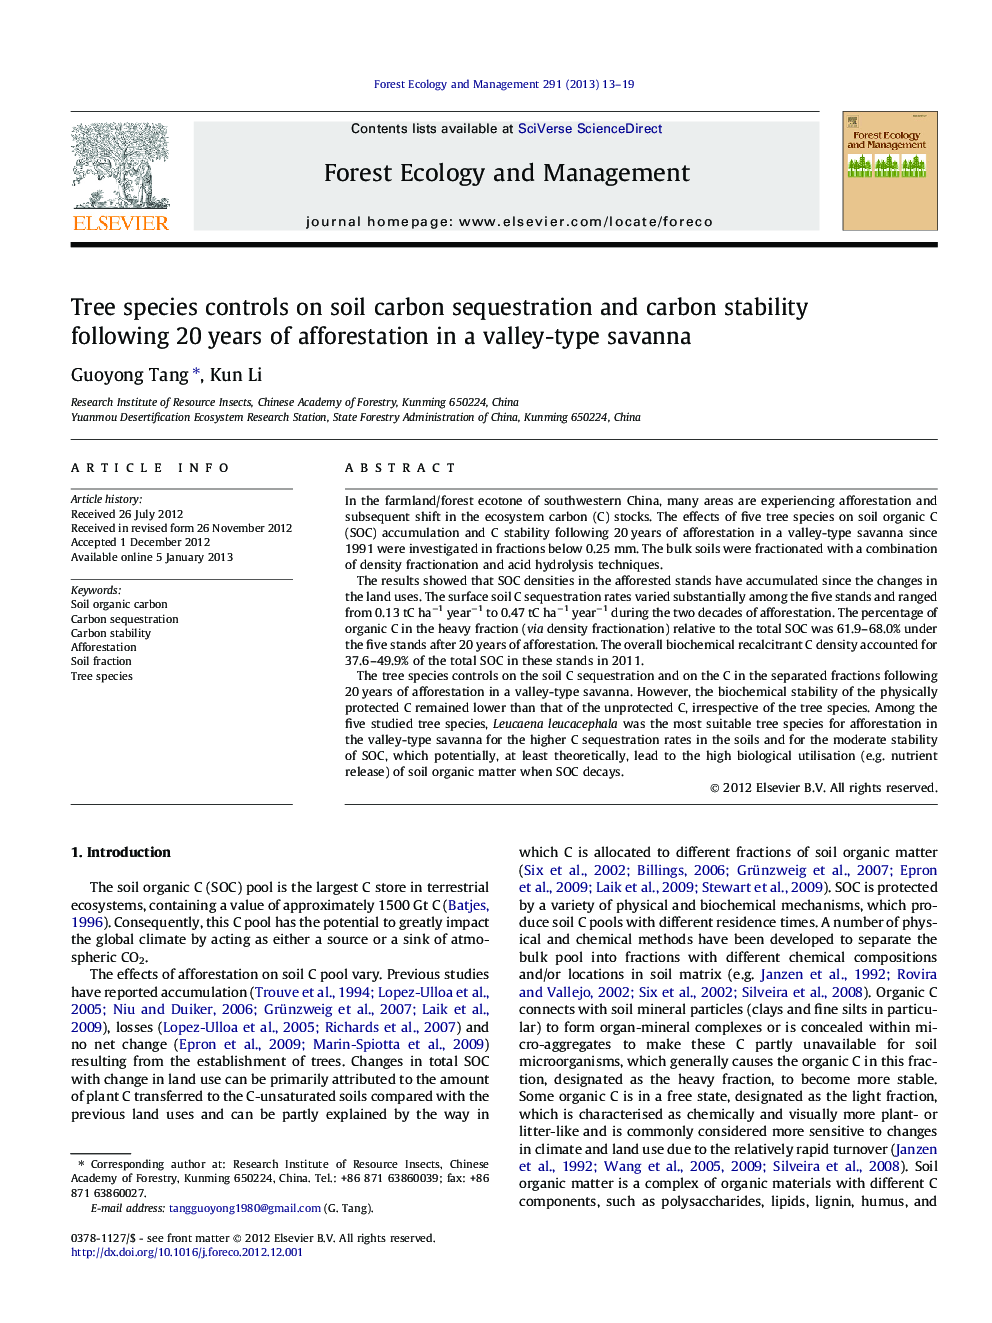 Tree species controls on soil carbon sequestration and carbon stability following 20Â years of afforestation in a valley-type savanna